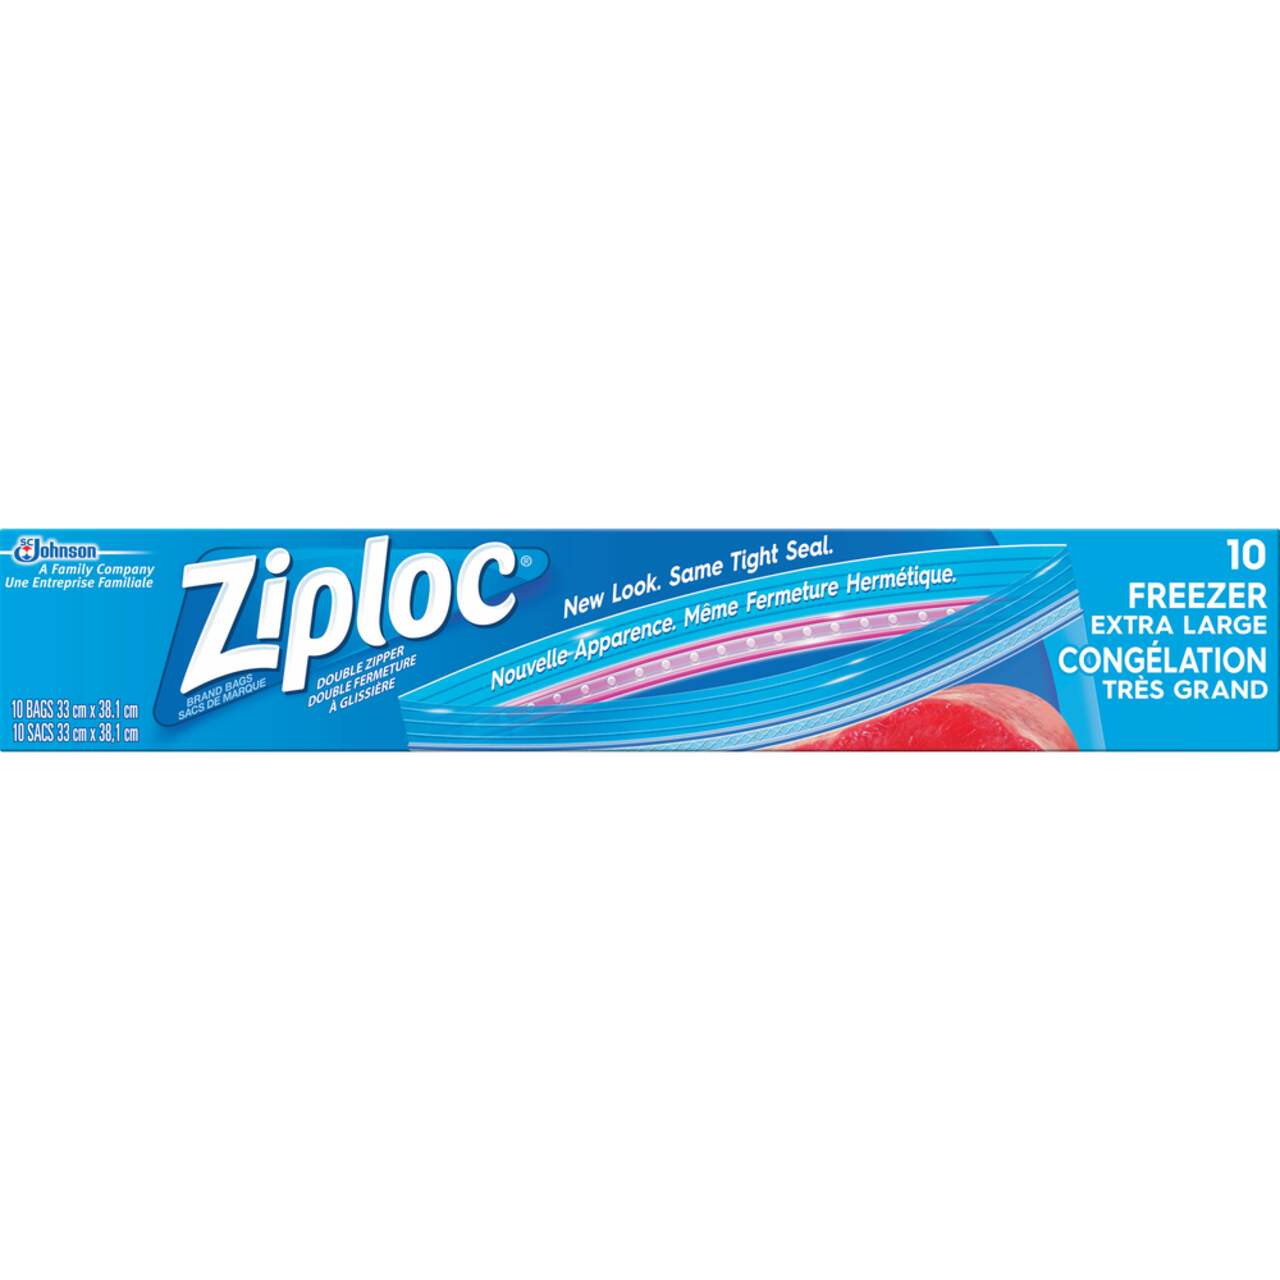 https://media-www.canadiantire.ca/product/living/home-essentials/household-consumables/0531959/ziploc-xlarge-freezer-bags-10ct-973c8c22-e205-4268-9c01-4ddcf476b078.png?imdensity=1&imwidth=640&impolicy=mZoom